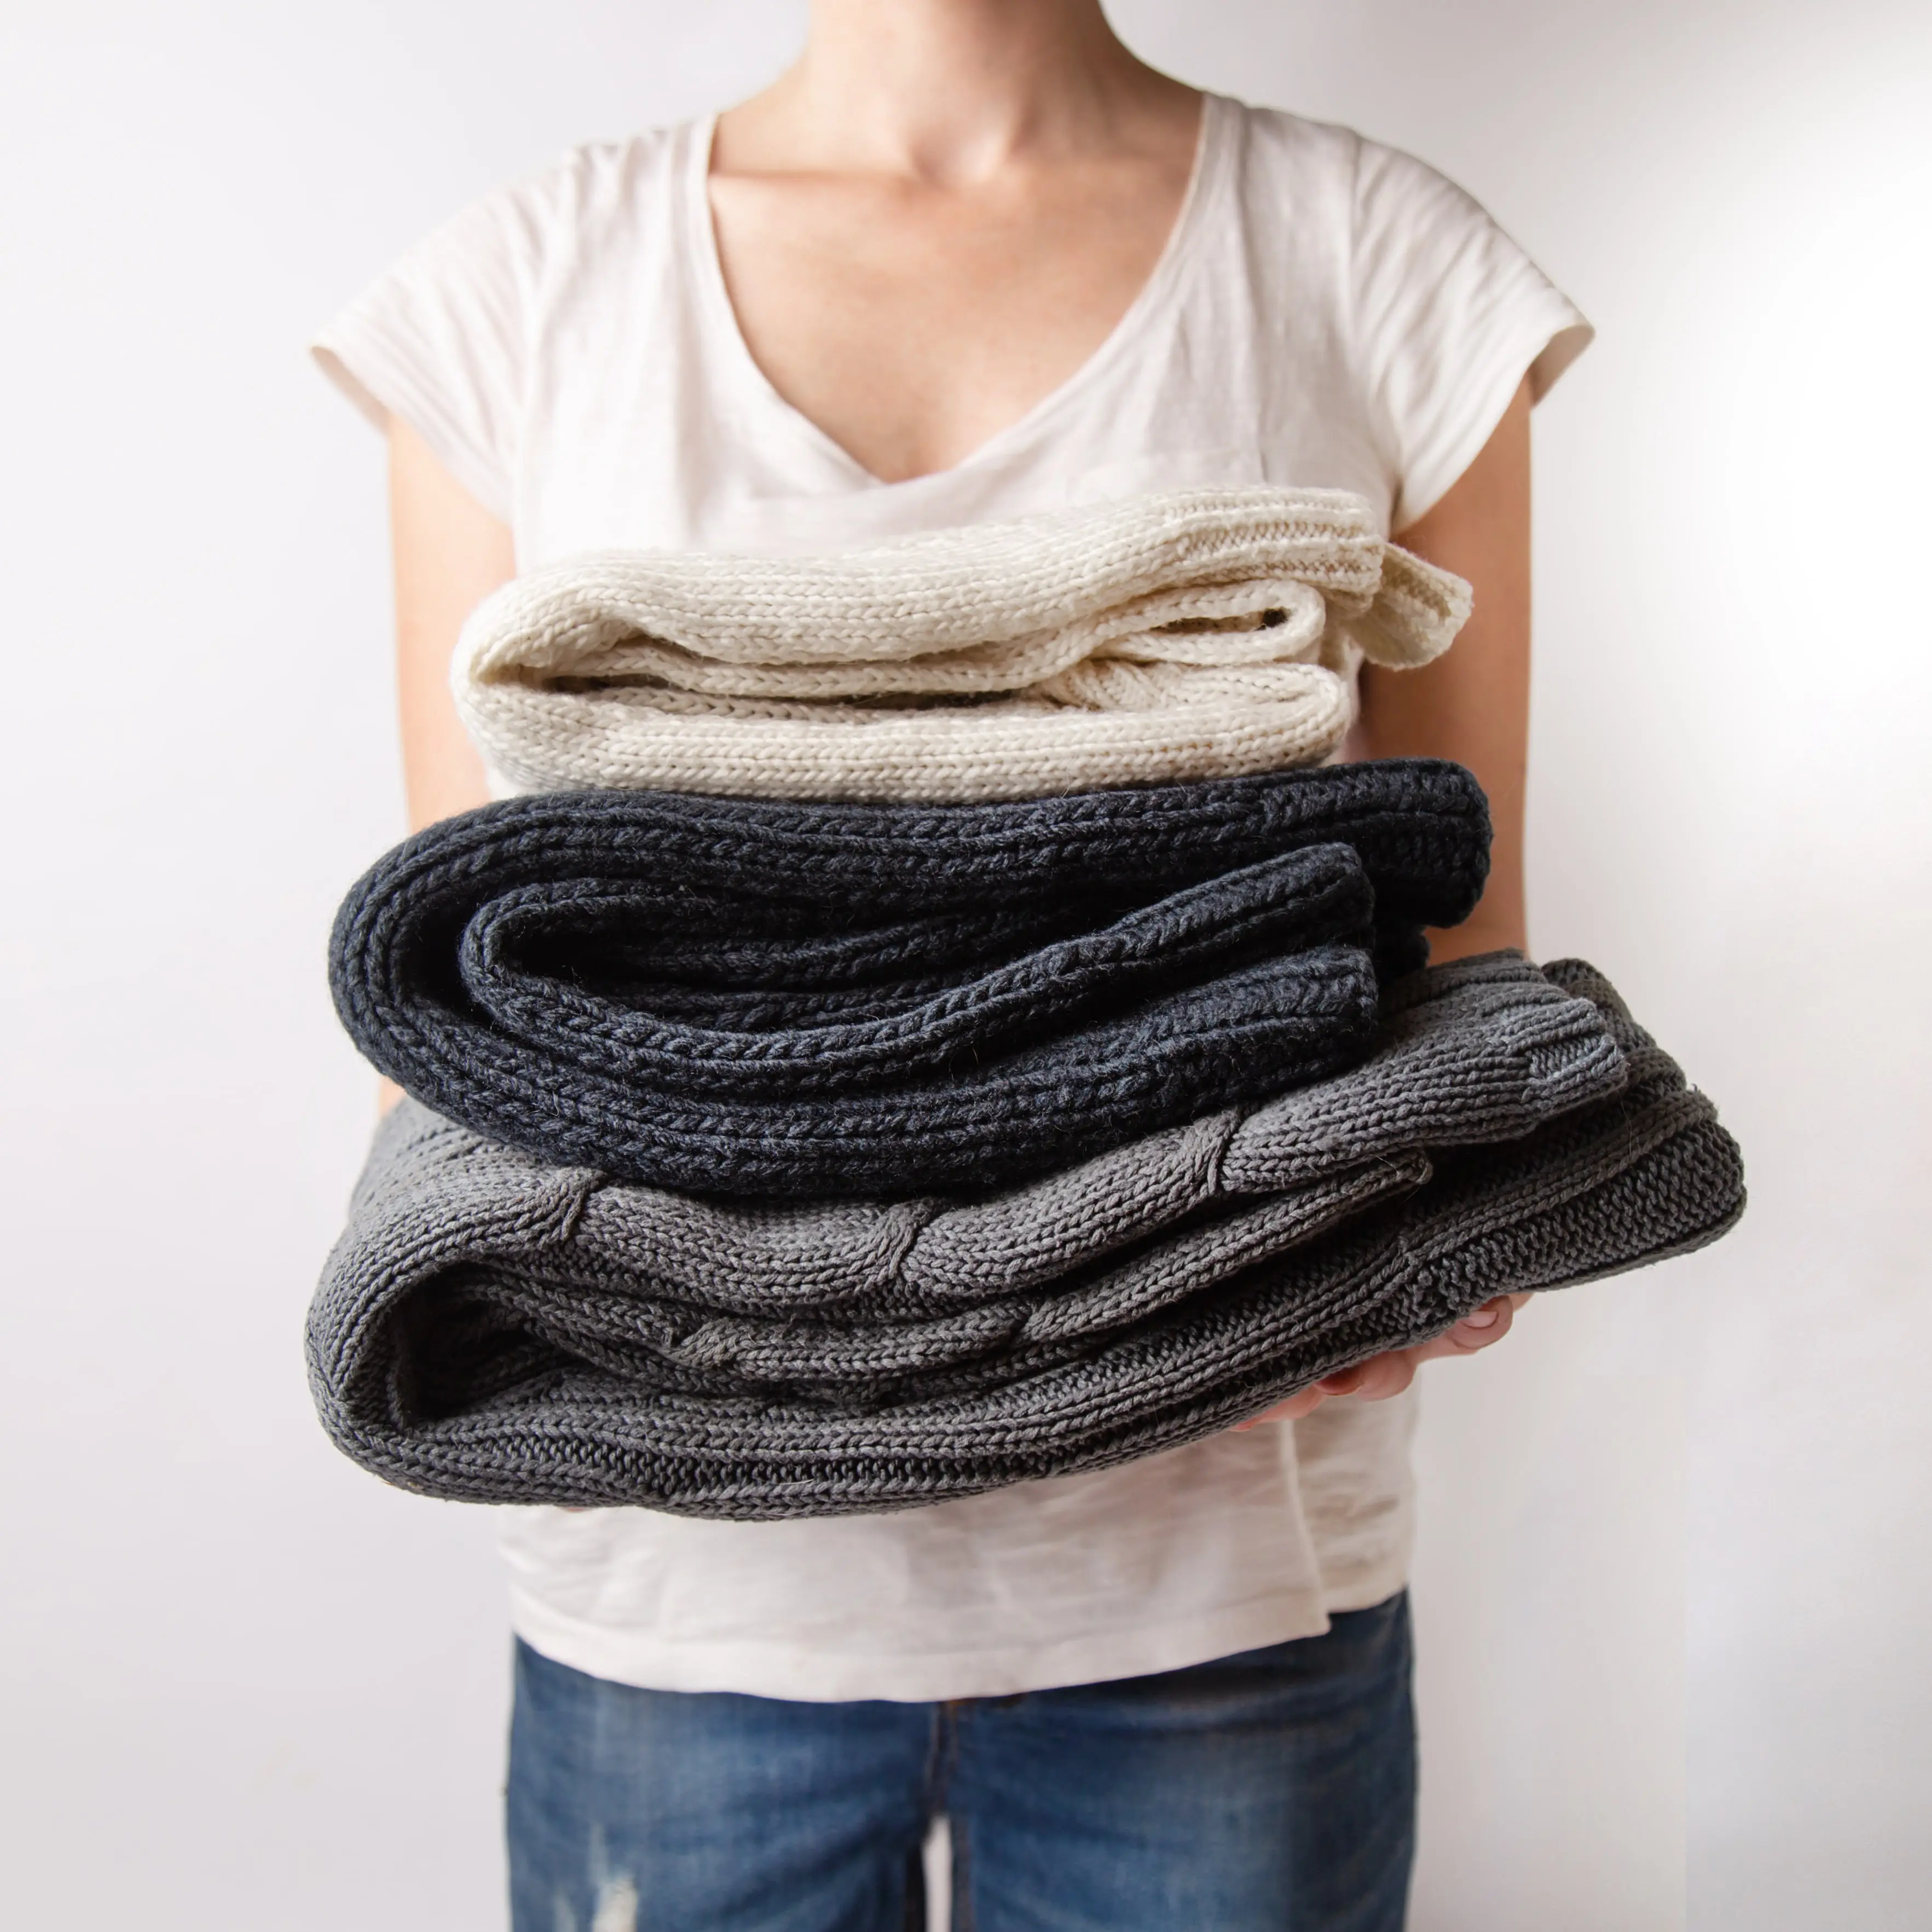 Blanket Cleaning | Dry Cleaning | Winter Clothing Cleaning